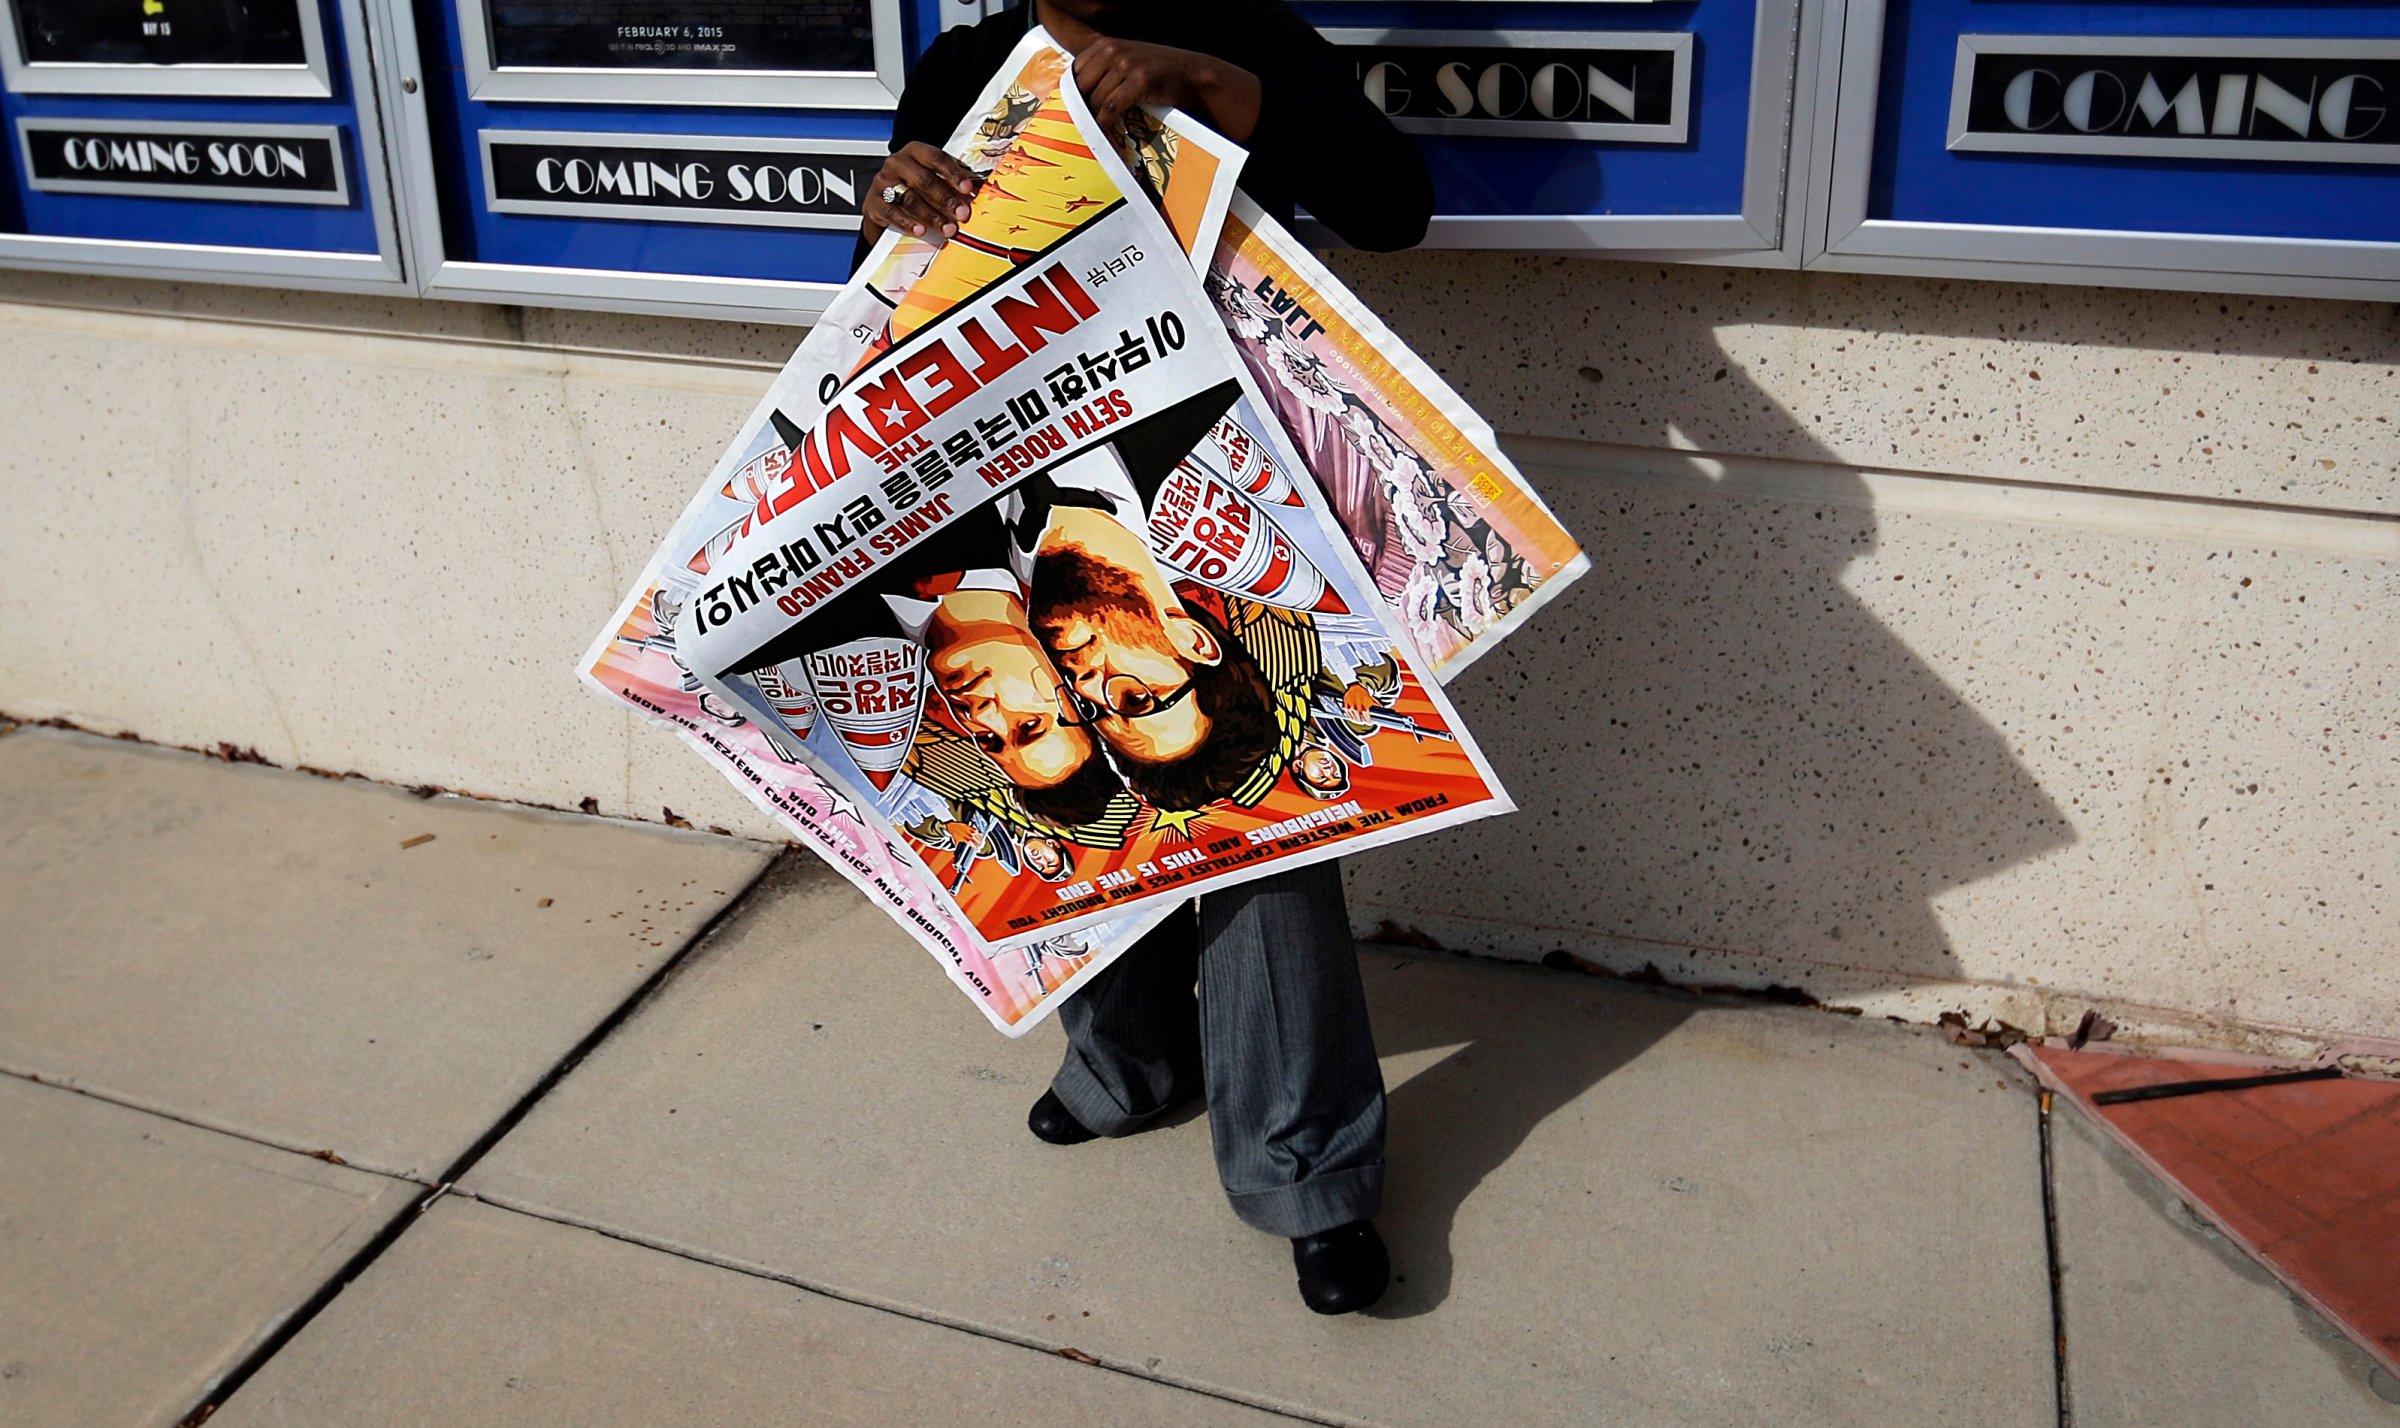 A poster for the movie "The Interview" is carried away by a worker after being pulled from a display case at a Carmike Cinemas movie theater on Dec. 17, 2014, in Atlanta.